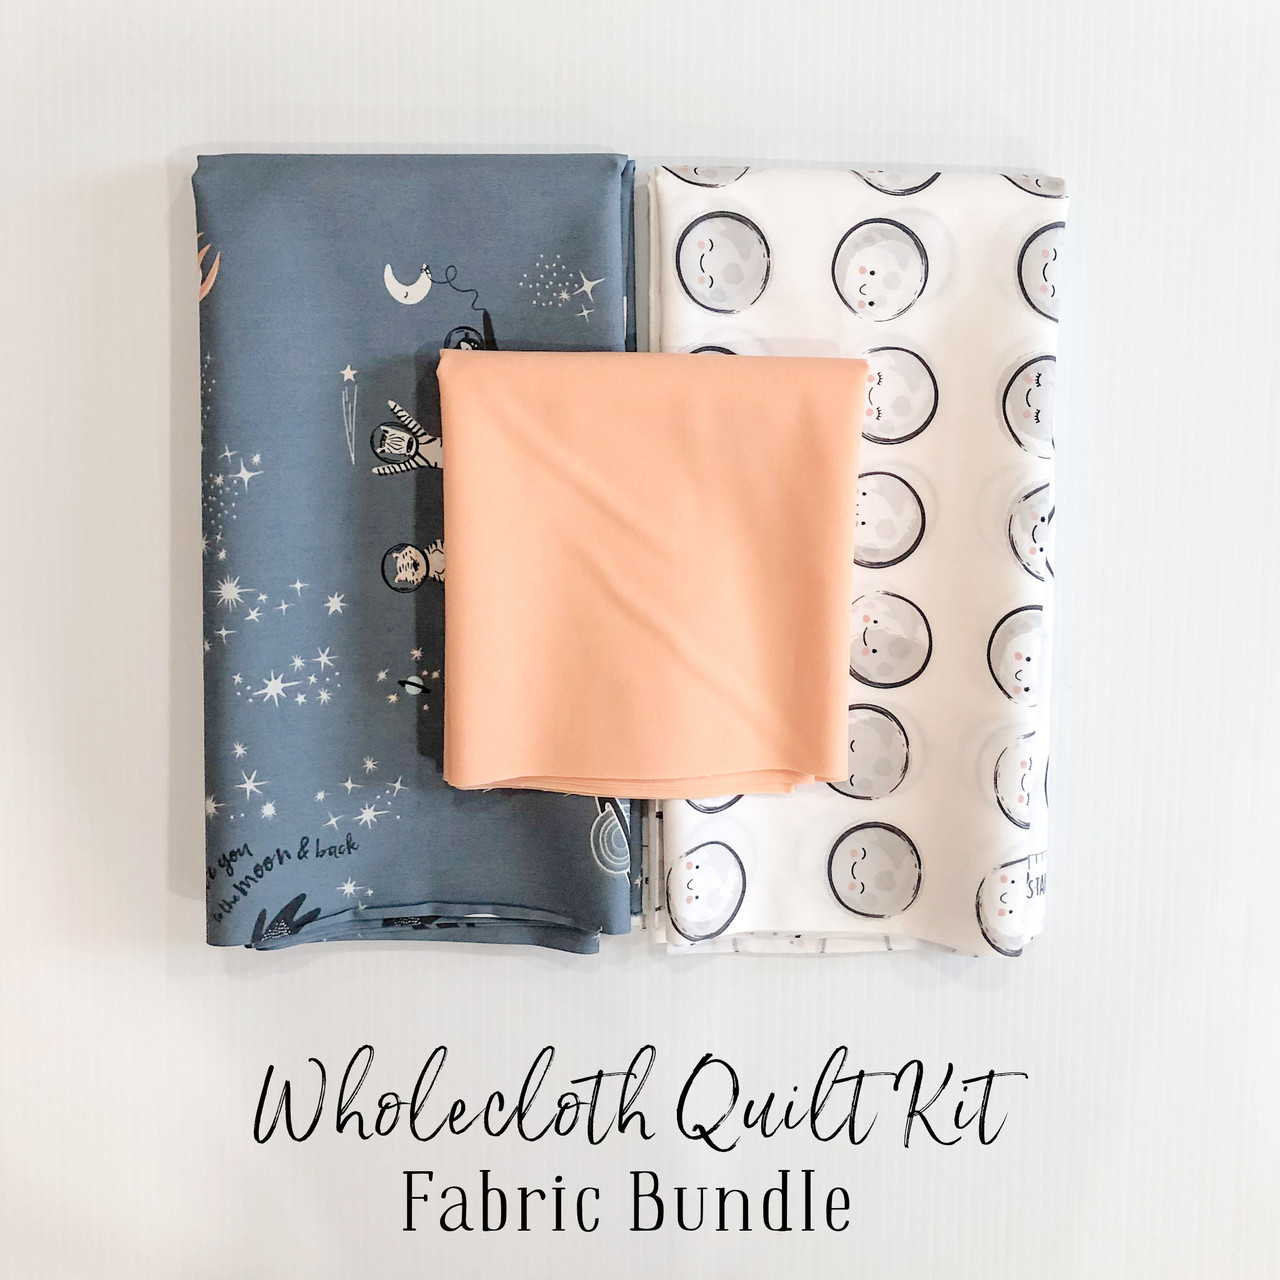 whole cloth quilt kits